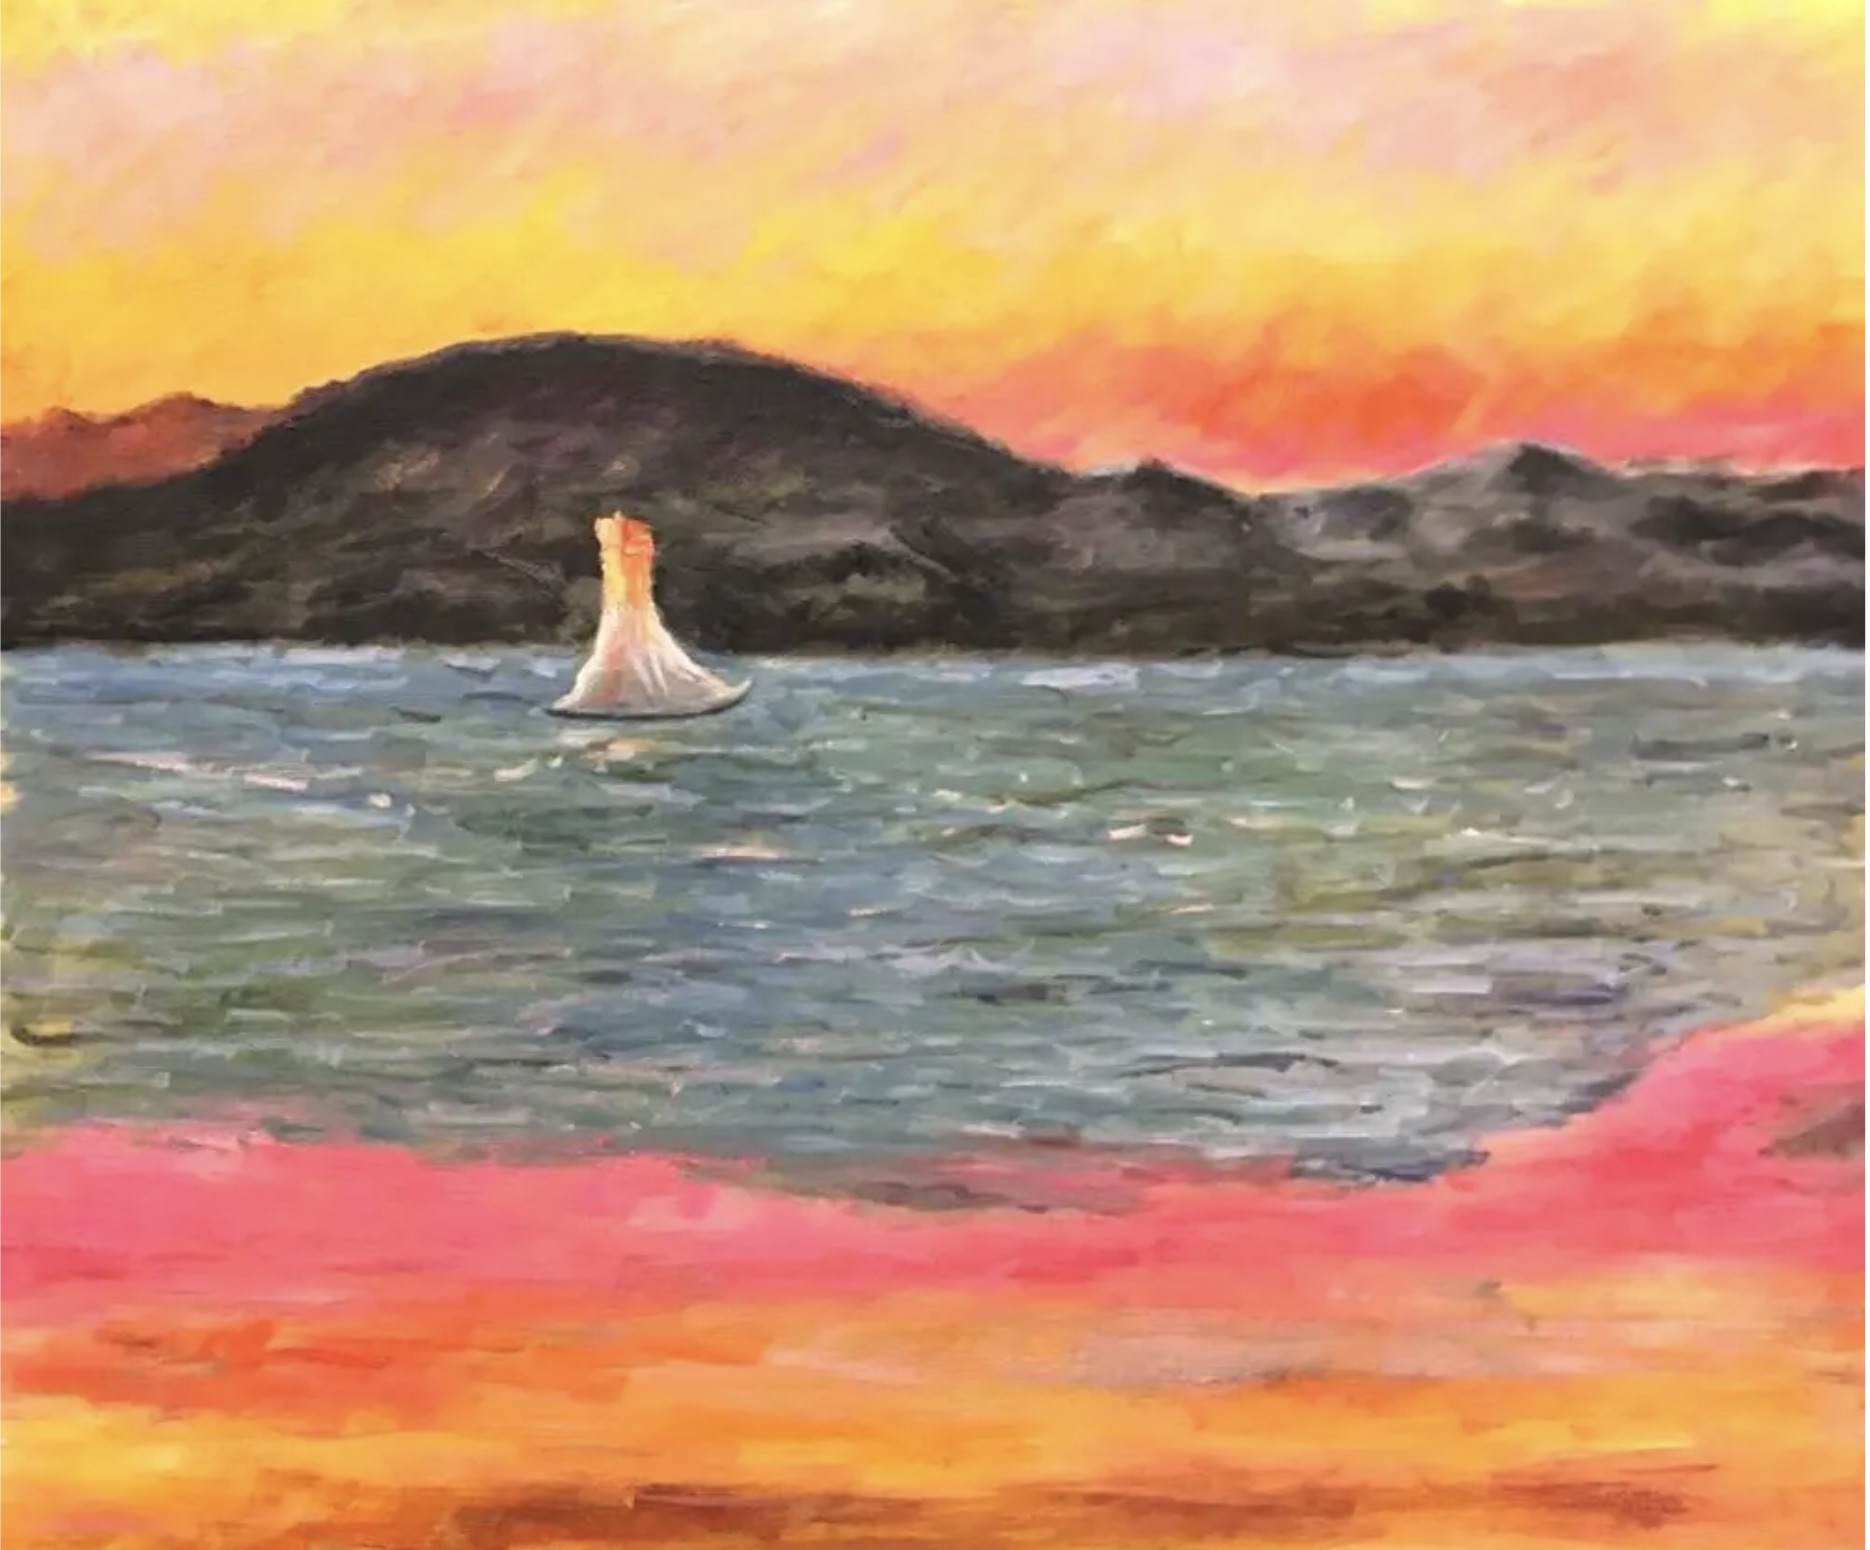 Pierre Bonnard "Sailboat at Sunset, 1905" Oil Painting, After